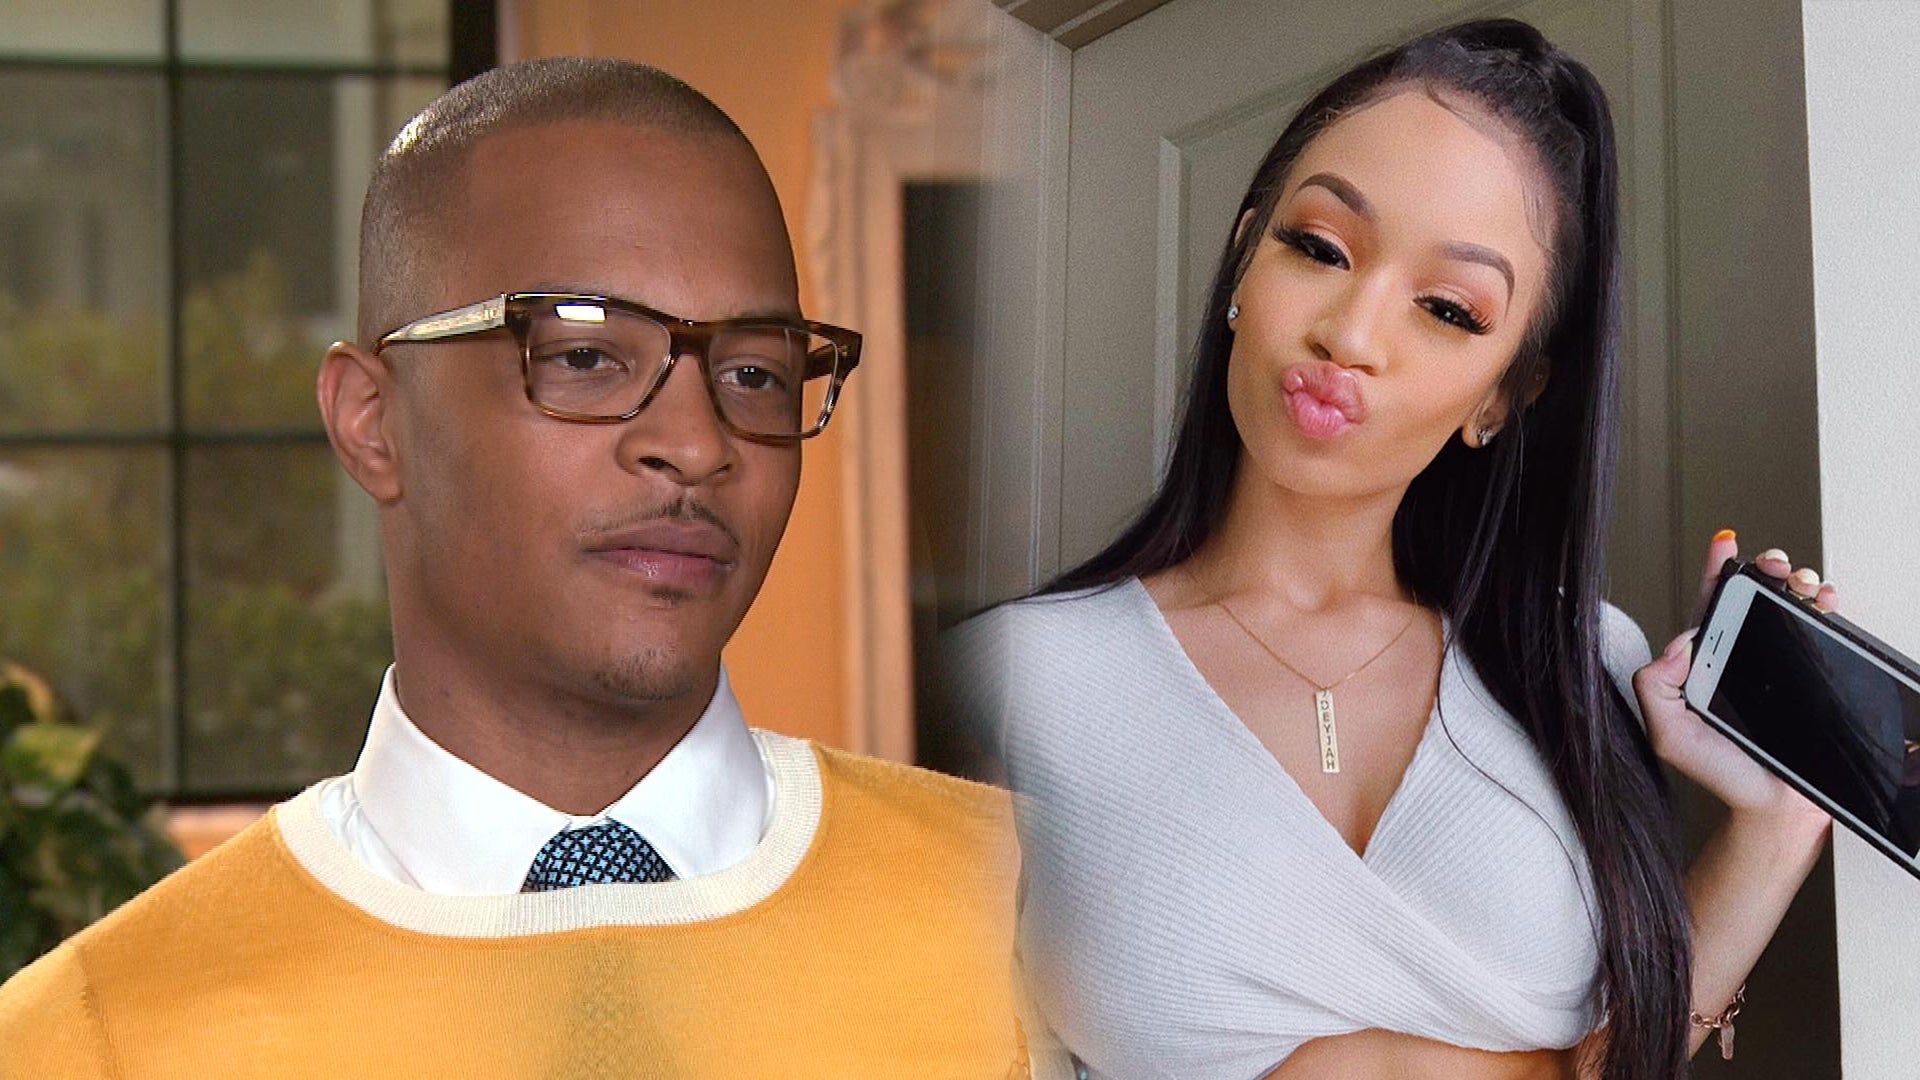 T.I.'s Comments About Daughter's Virginity Lead Podcast Hosts to Apologize and Episode | Tonight